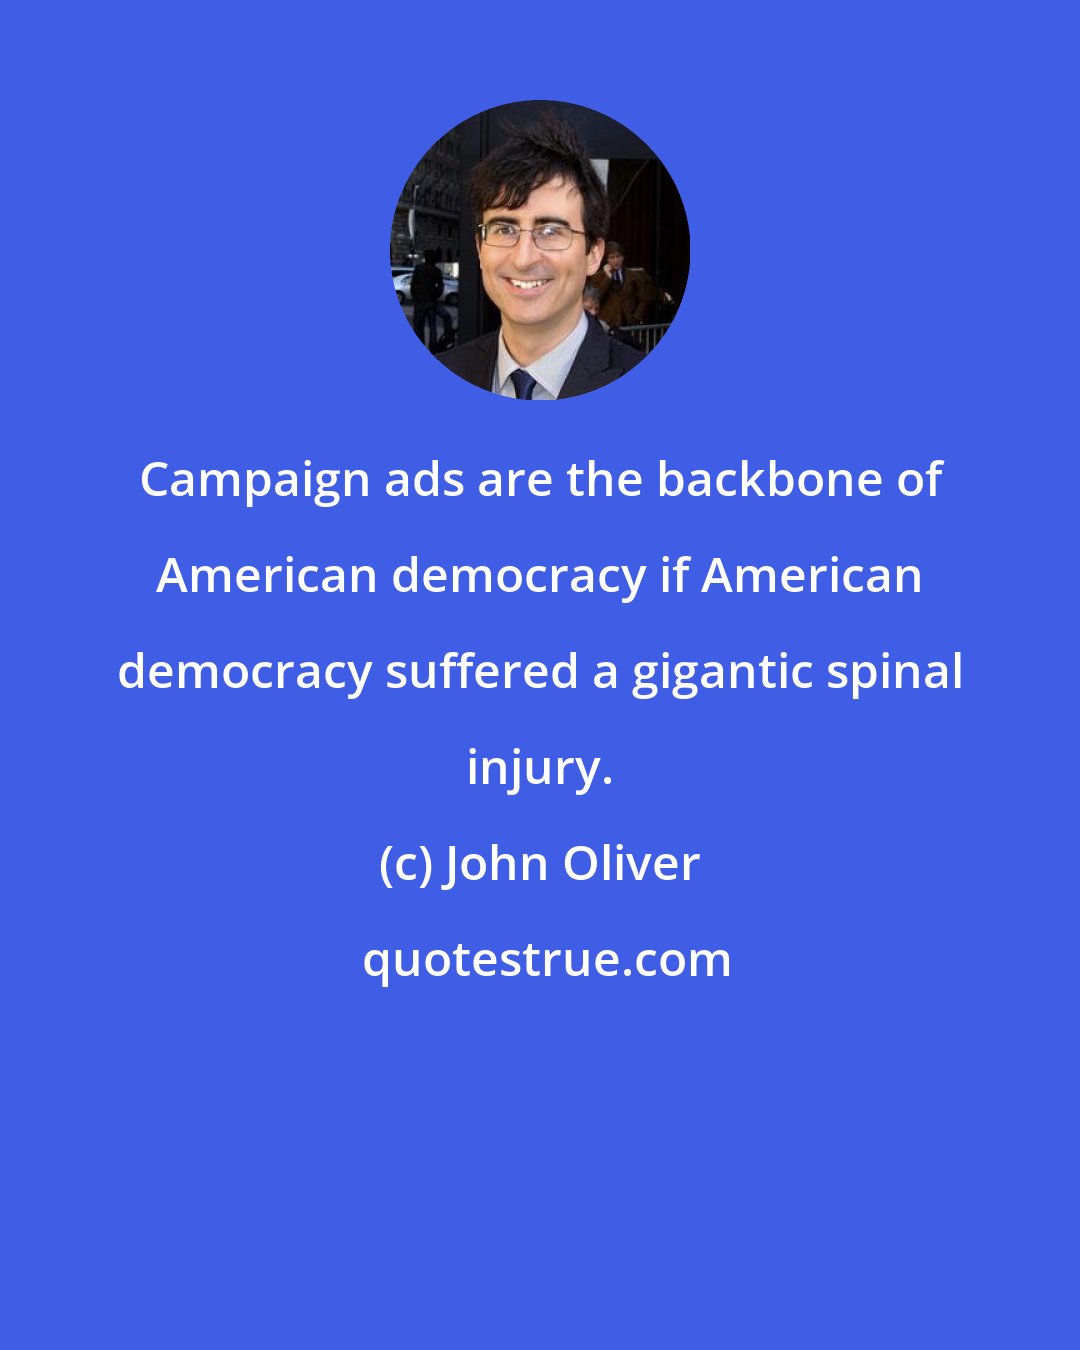 John Oliver: Campaign ads are the backbone of American democracy if American democracy suffered a gigantic spinal injury.